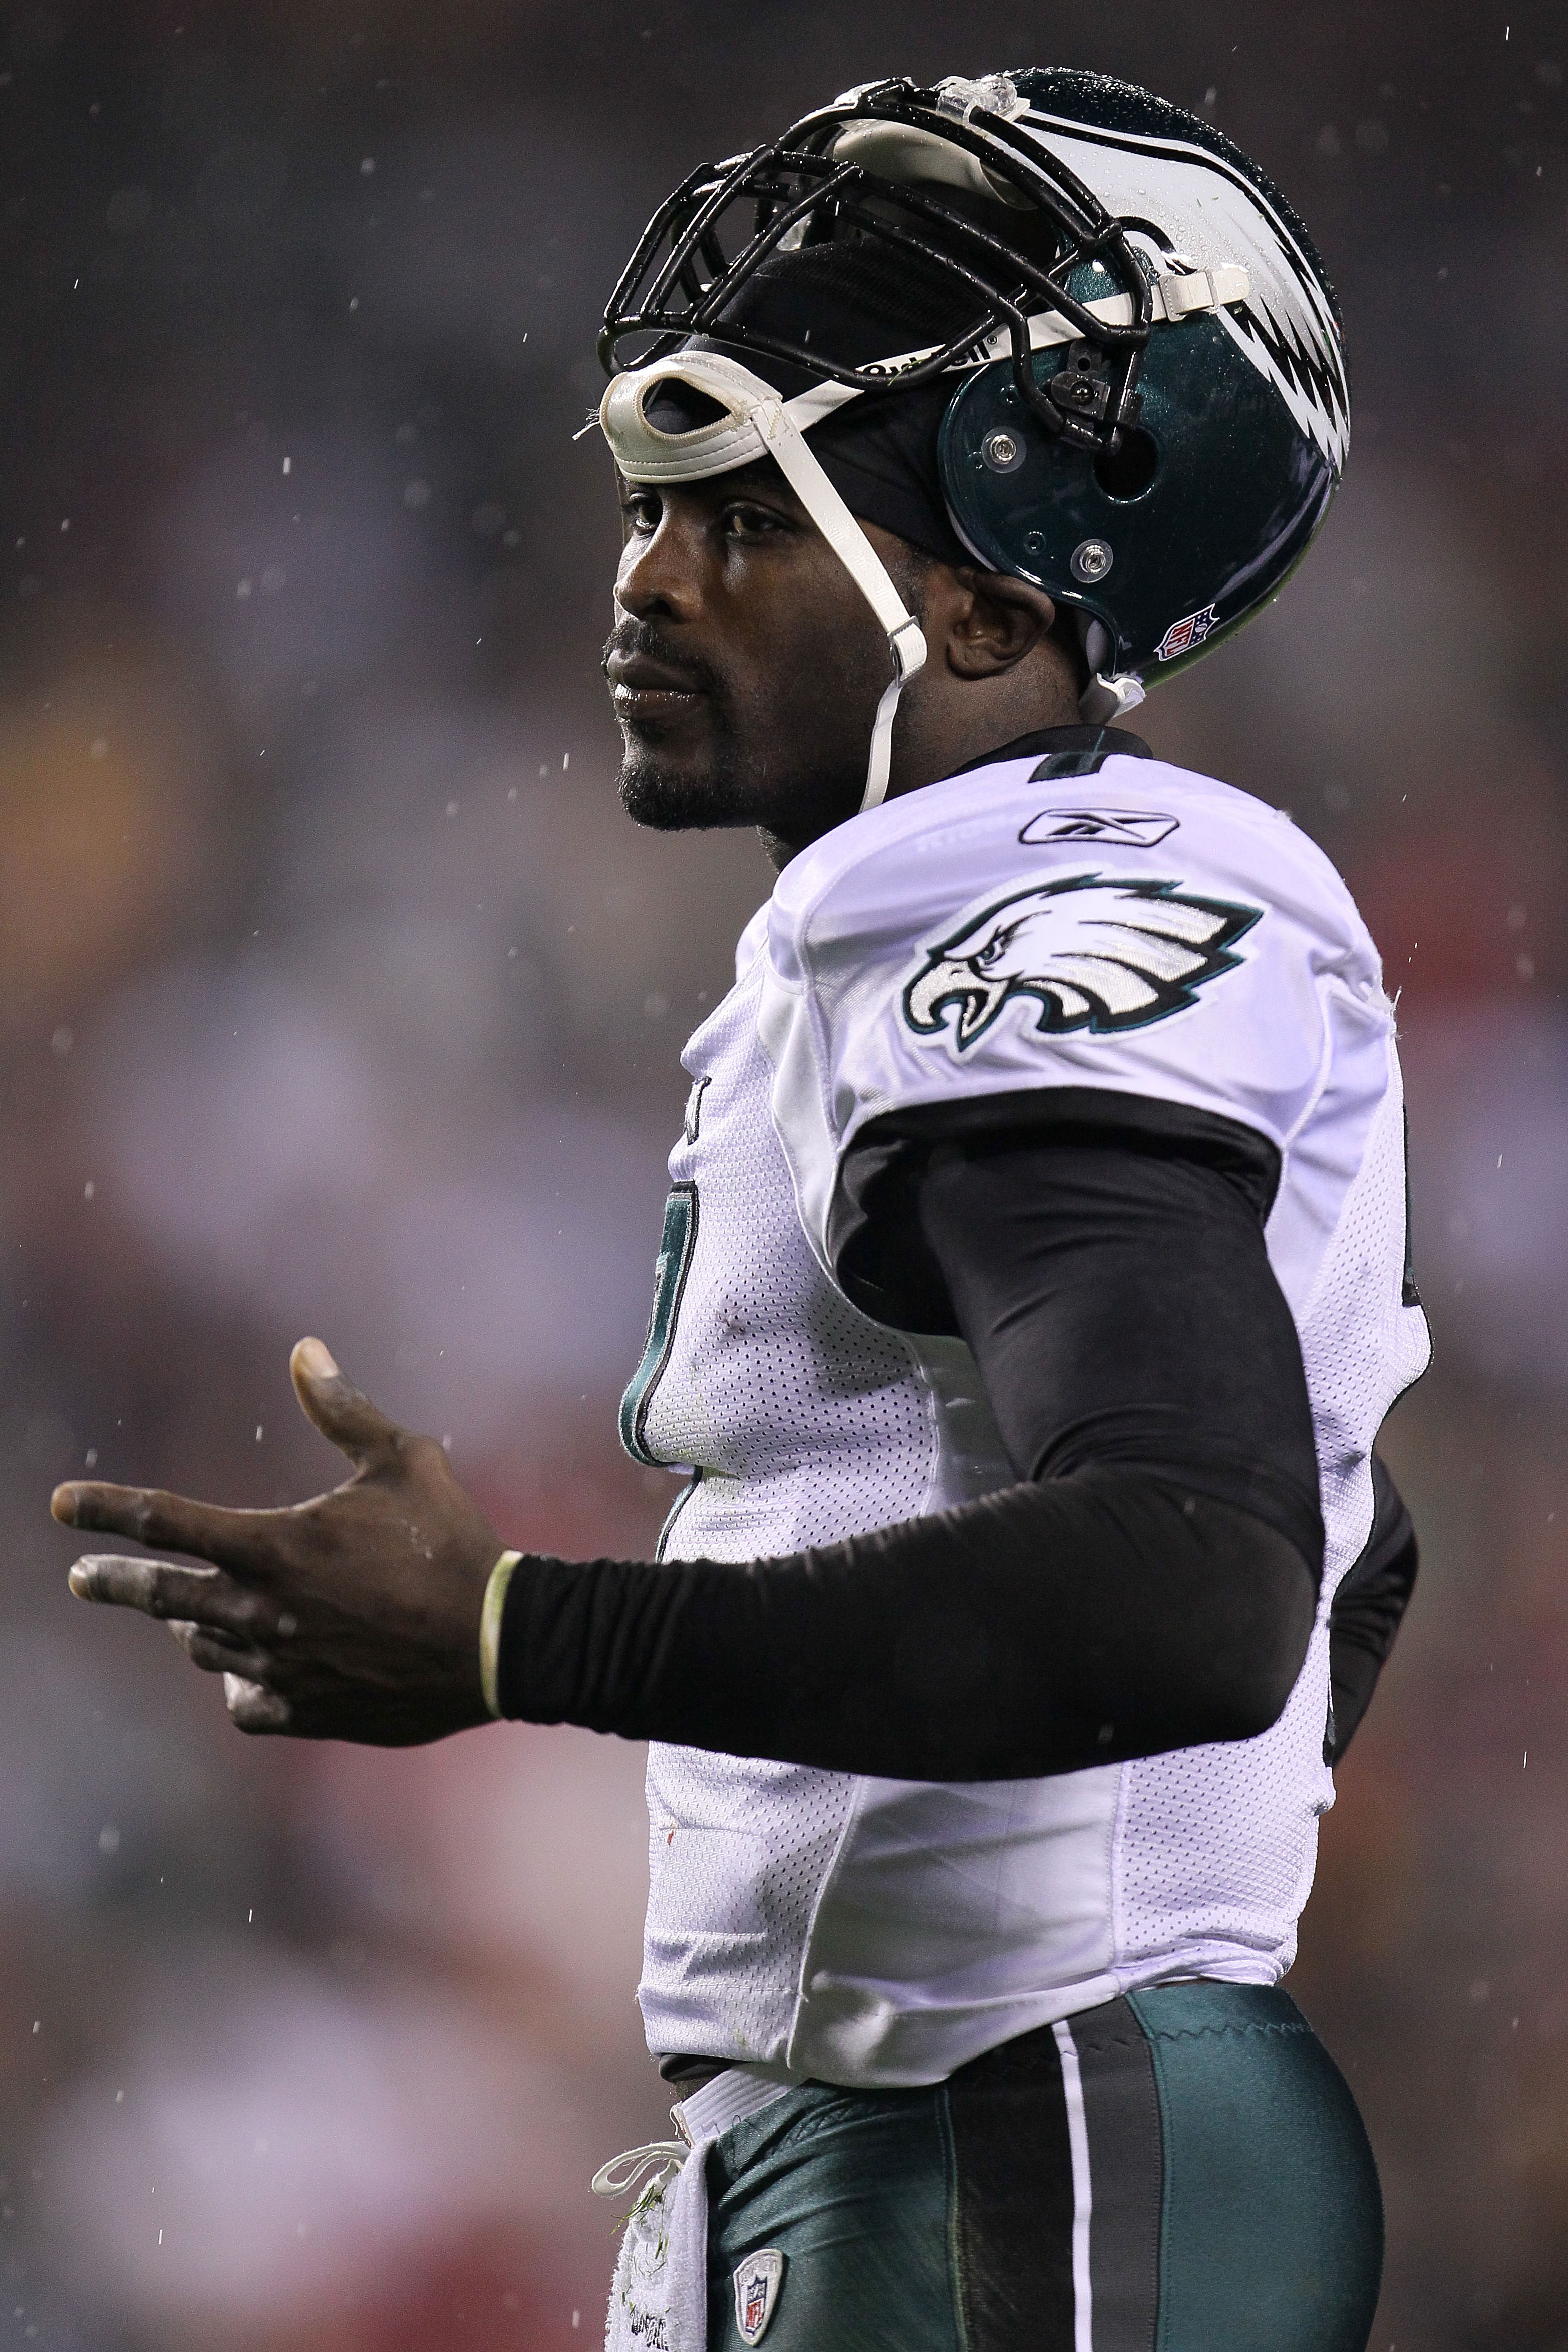 Michael Vick: Where Does He Rank Amongst Top 10 MVP Candidates